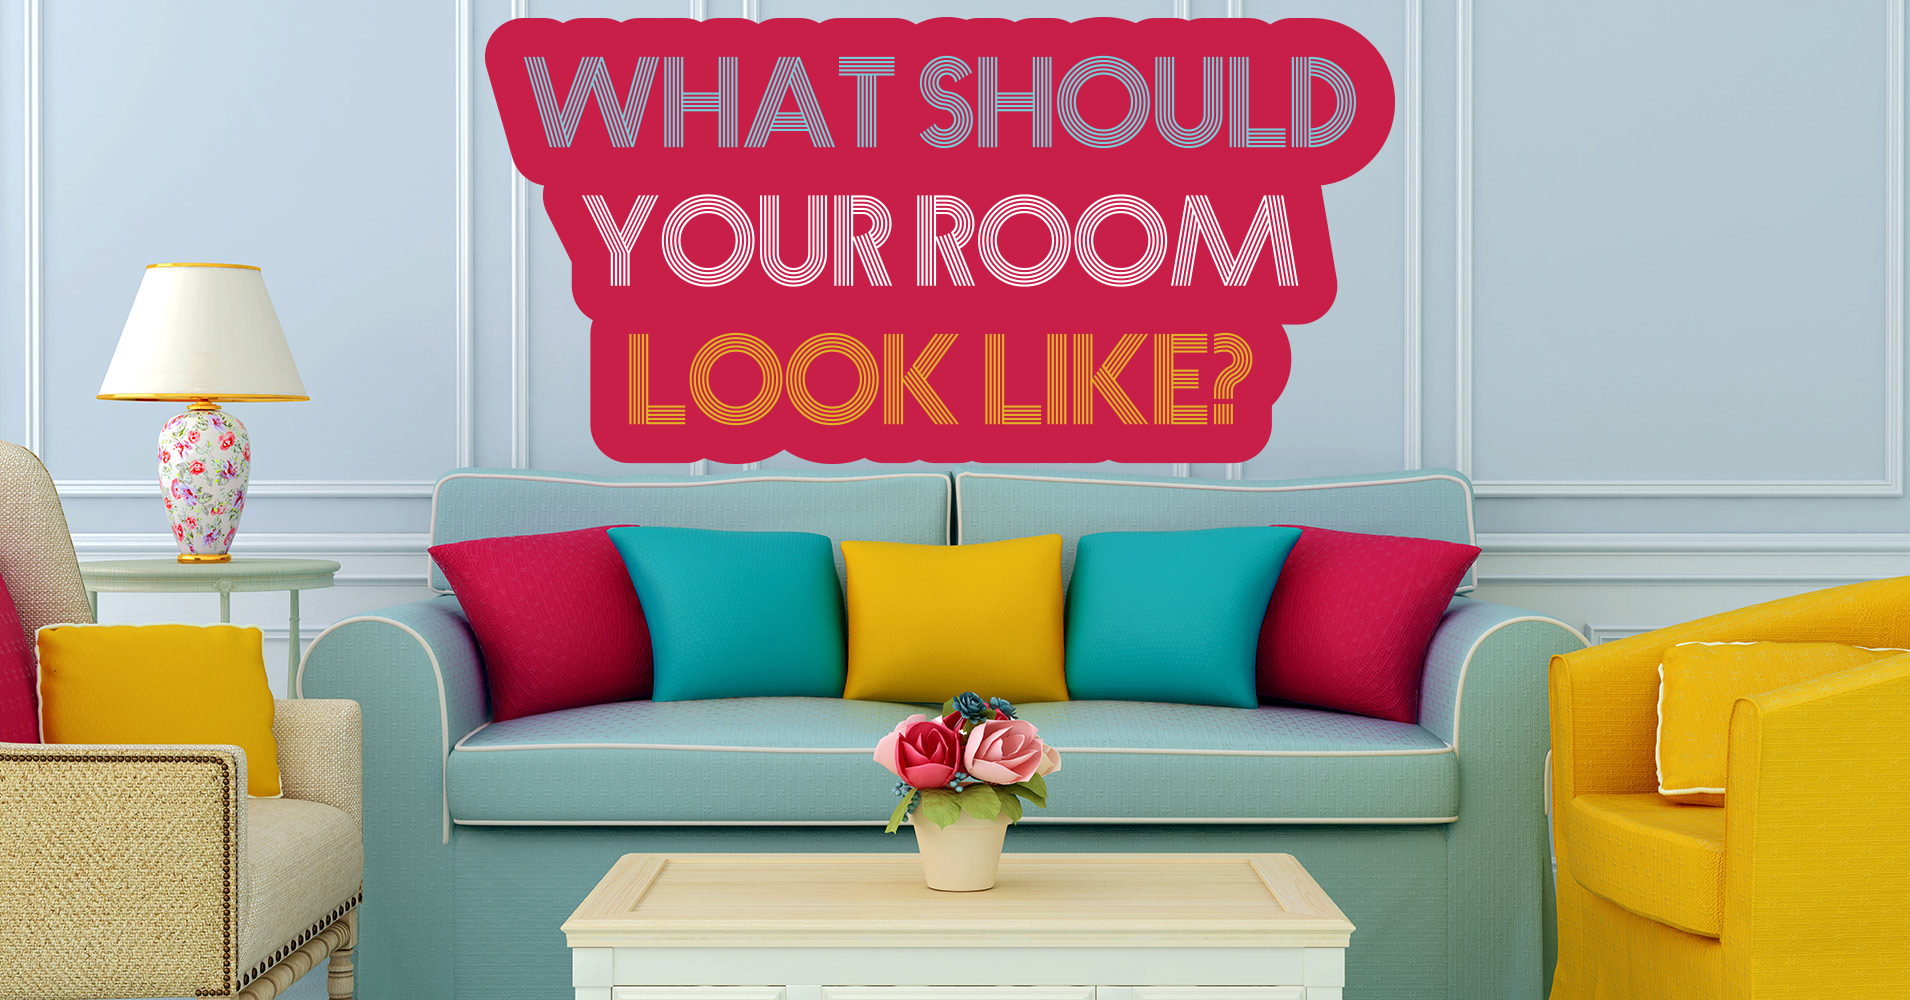 What Should Your Room Look Like? - Quiz - Quizony.com